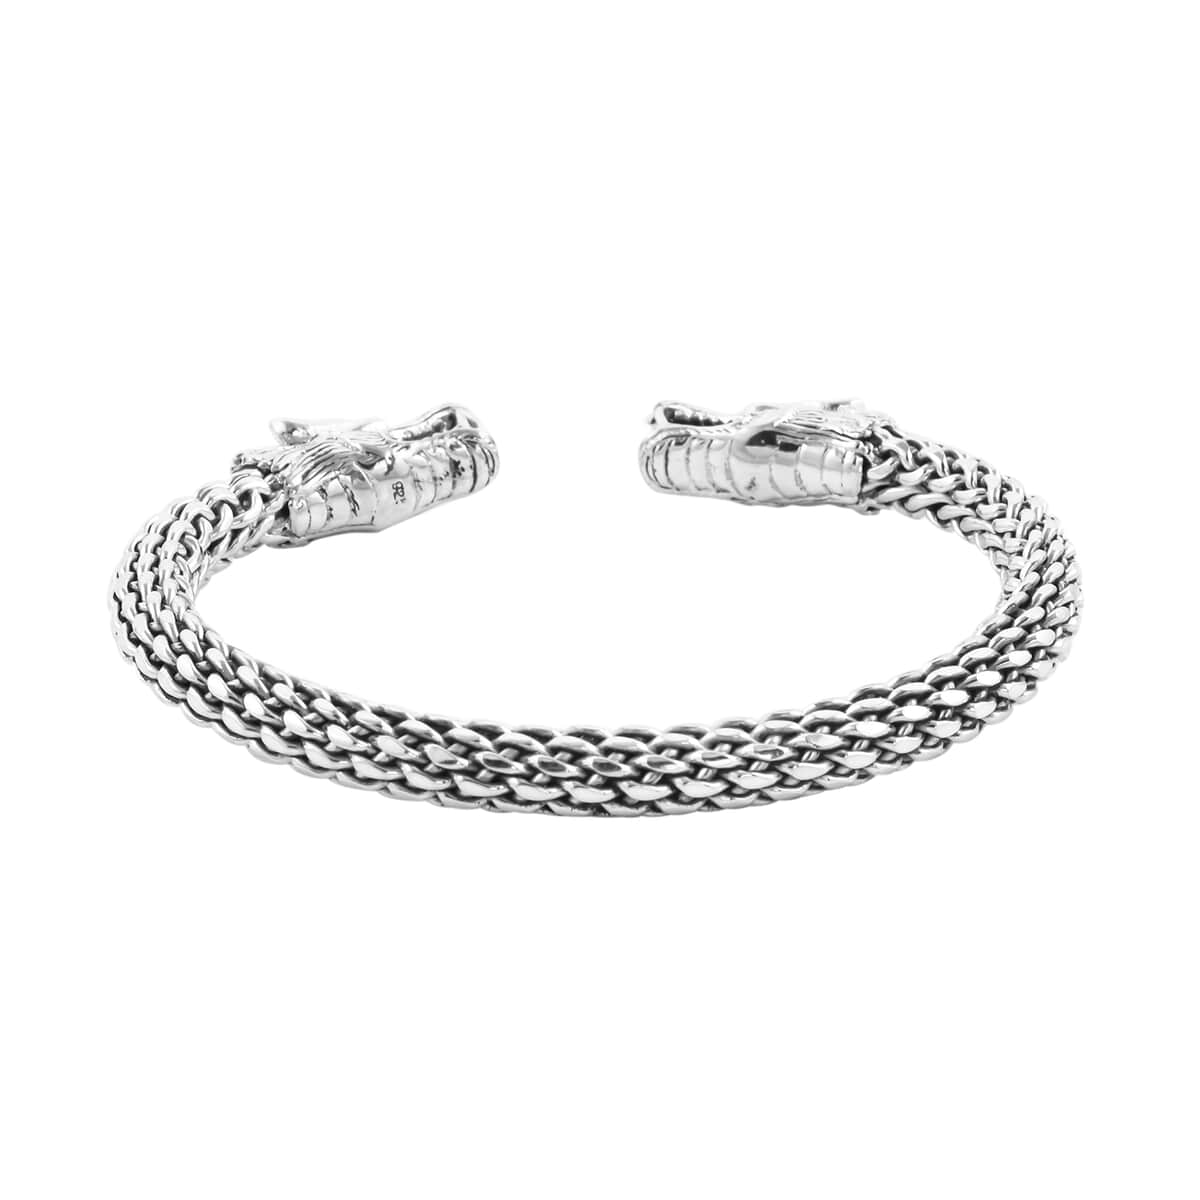 Bali Legacy Sterling Silver Dragon Cuff Bracelet (7.25 in) 49.35 Grams image number 4